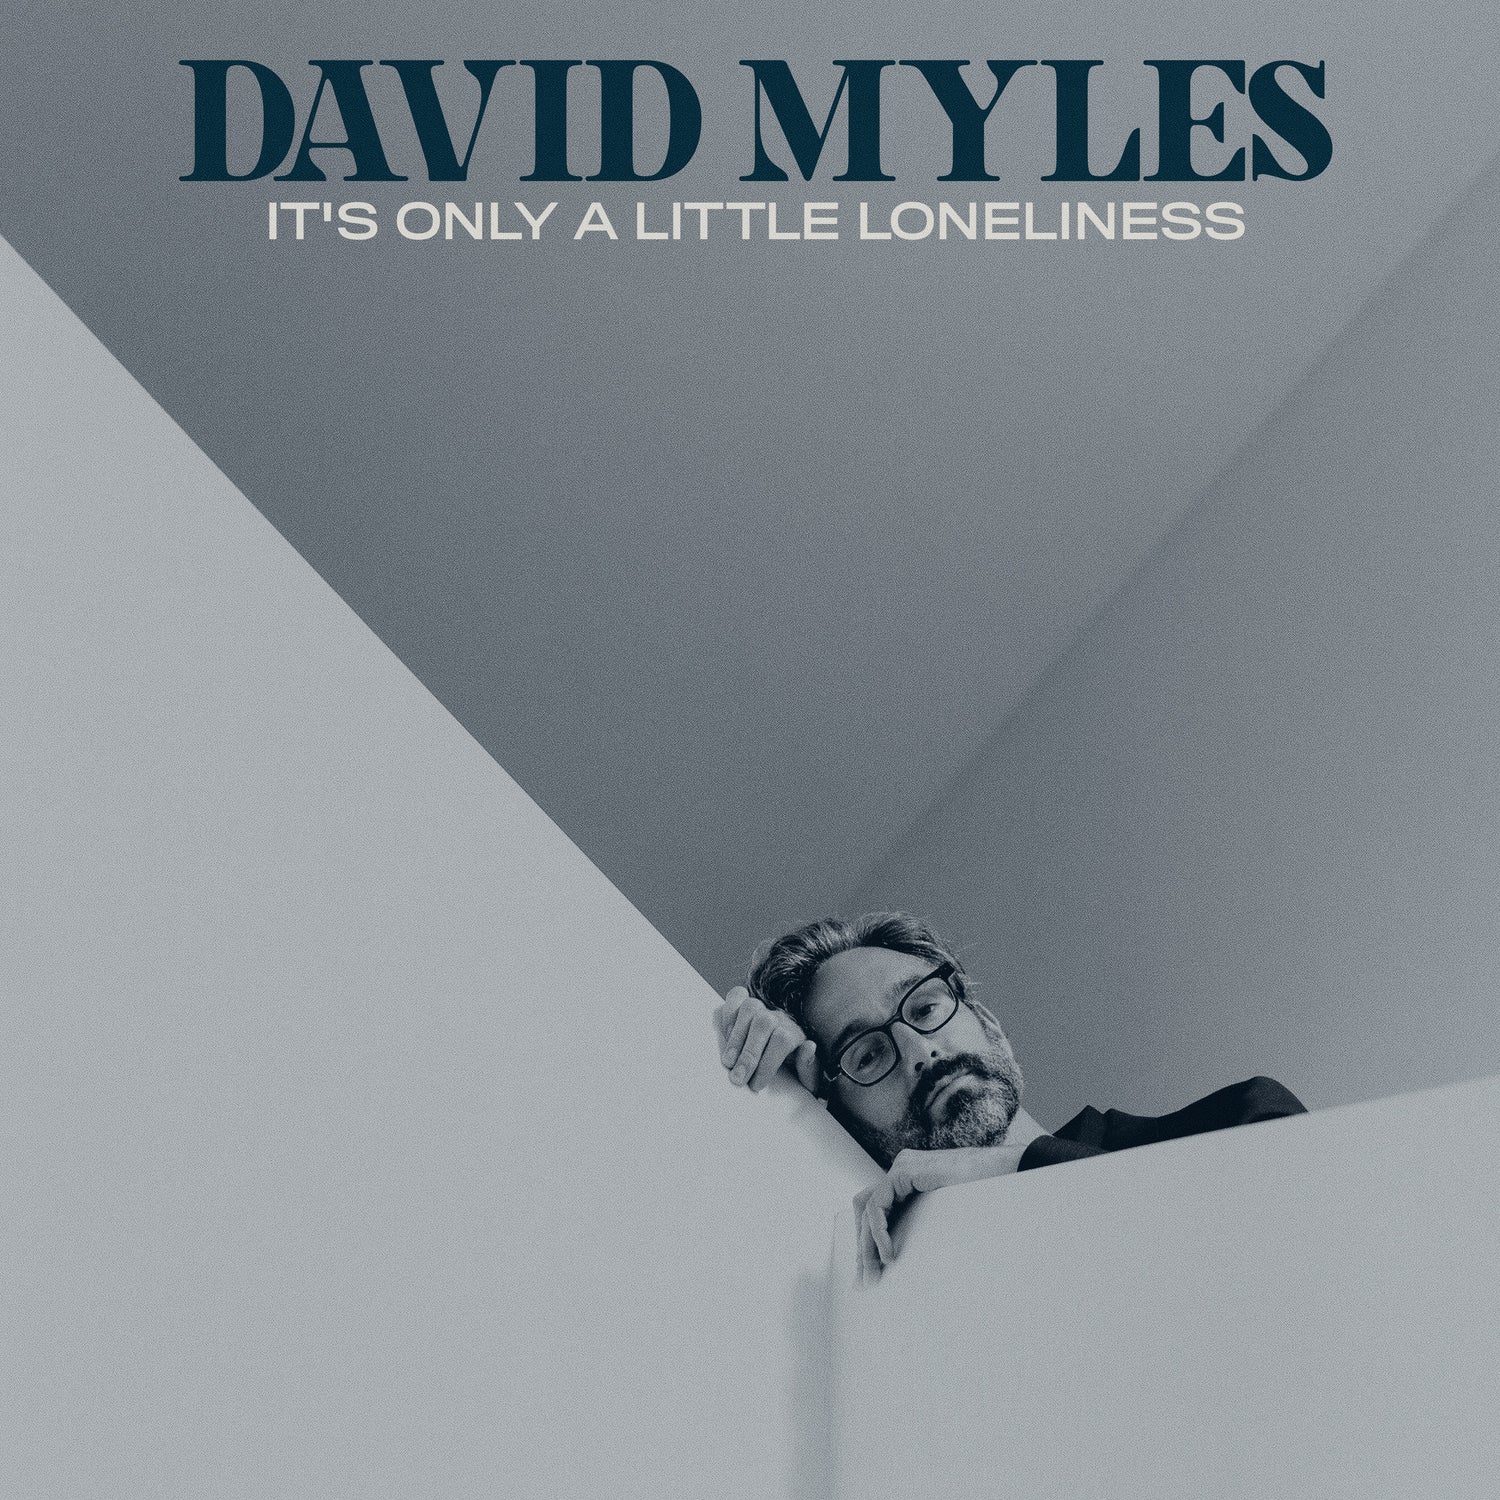 David Myles It's Only a Little Loneliness artwork